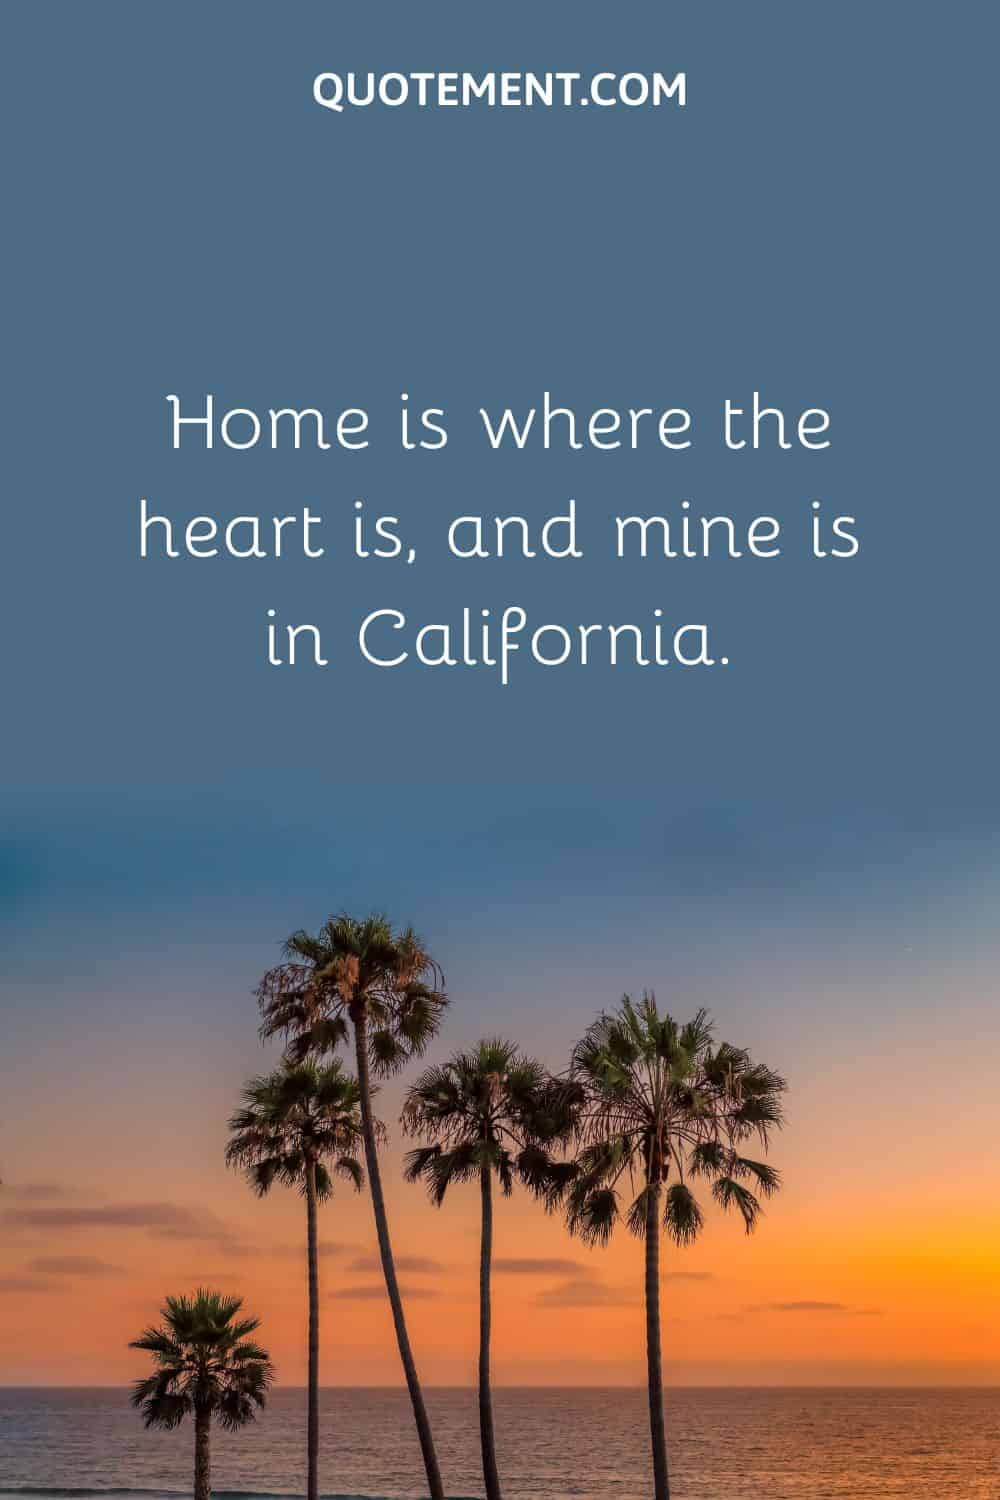 Home is where the heart is, and mine is in California